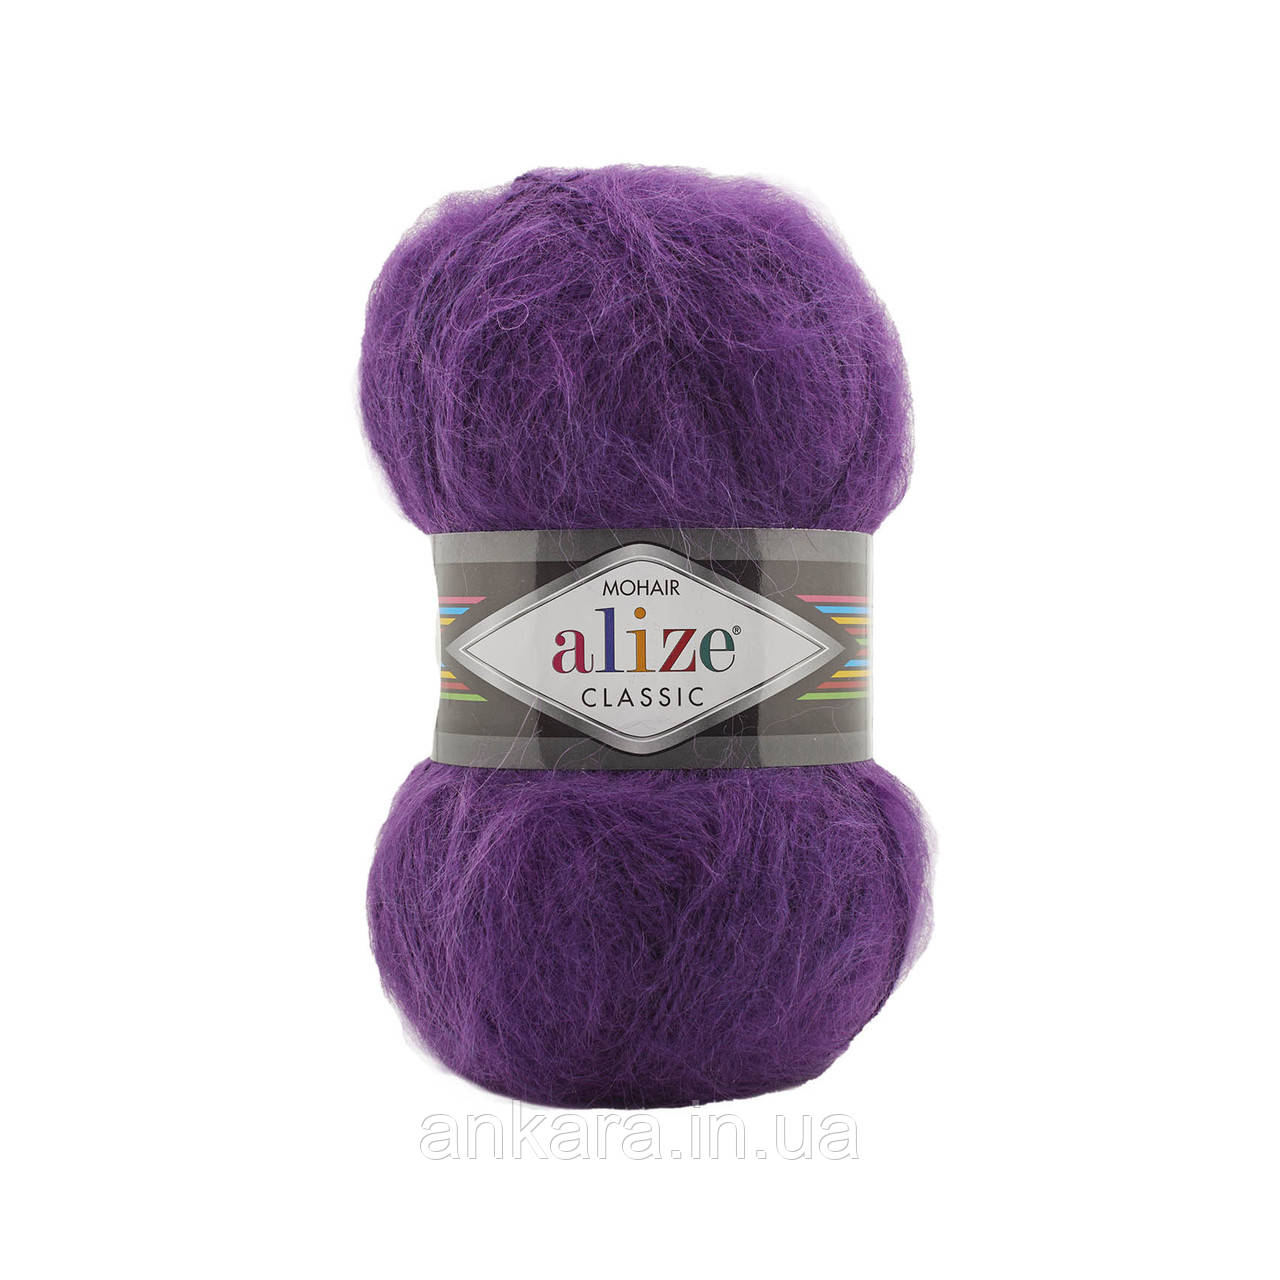 Alize Mohair Classic 863